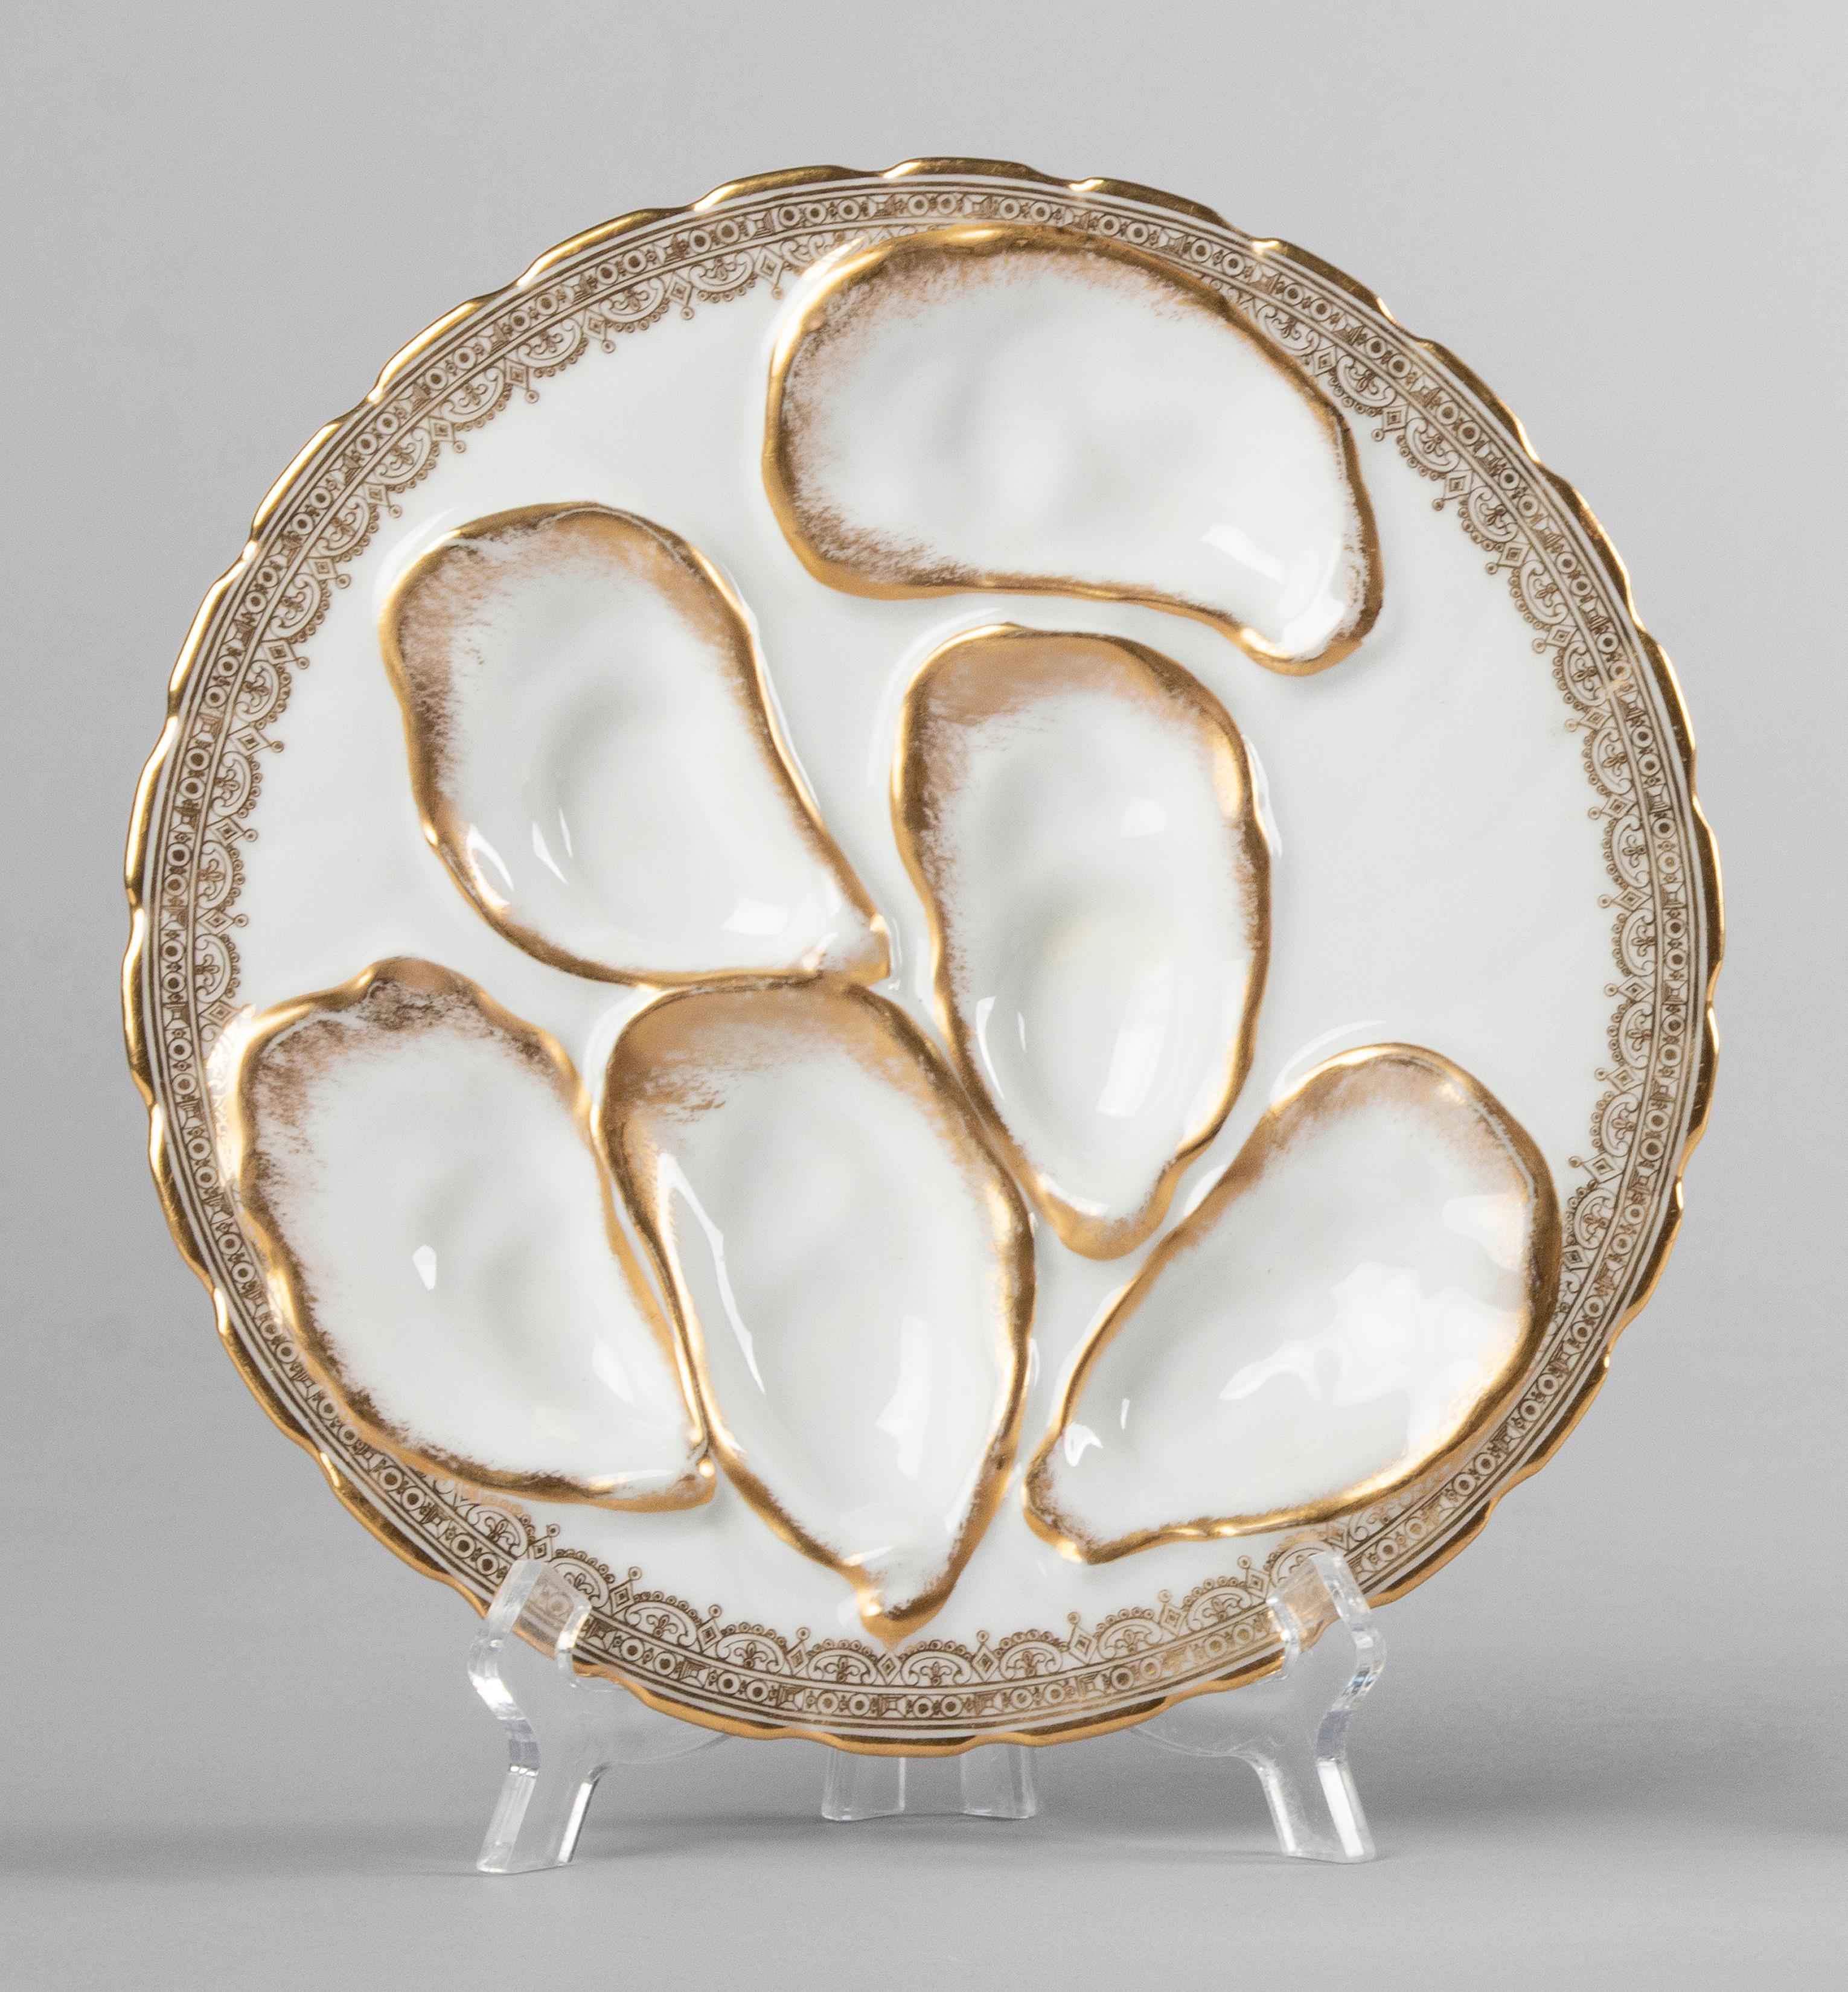 Romantic Two 19th Century Porcelain Oyster Plates by Haviland Limoges